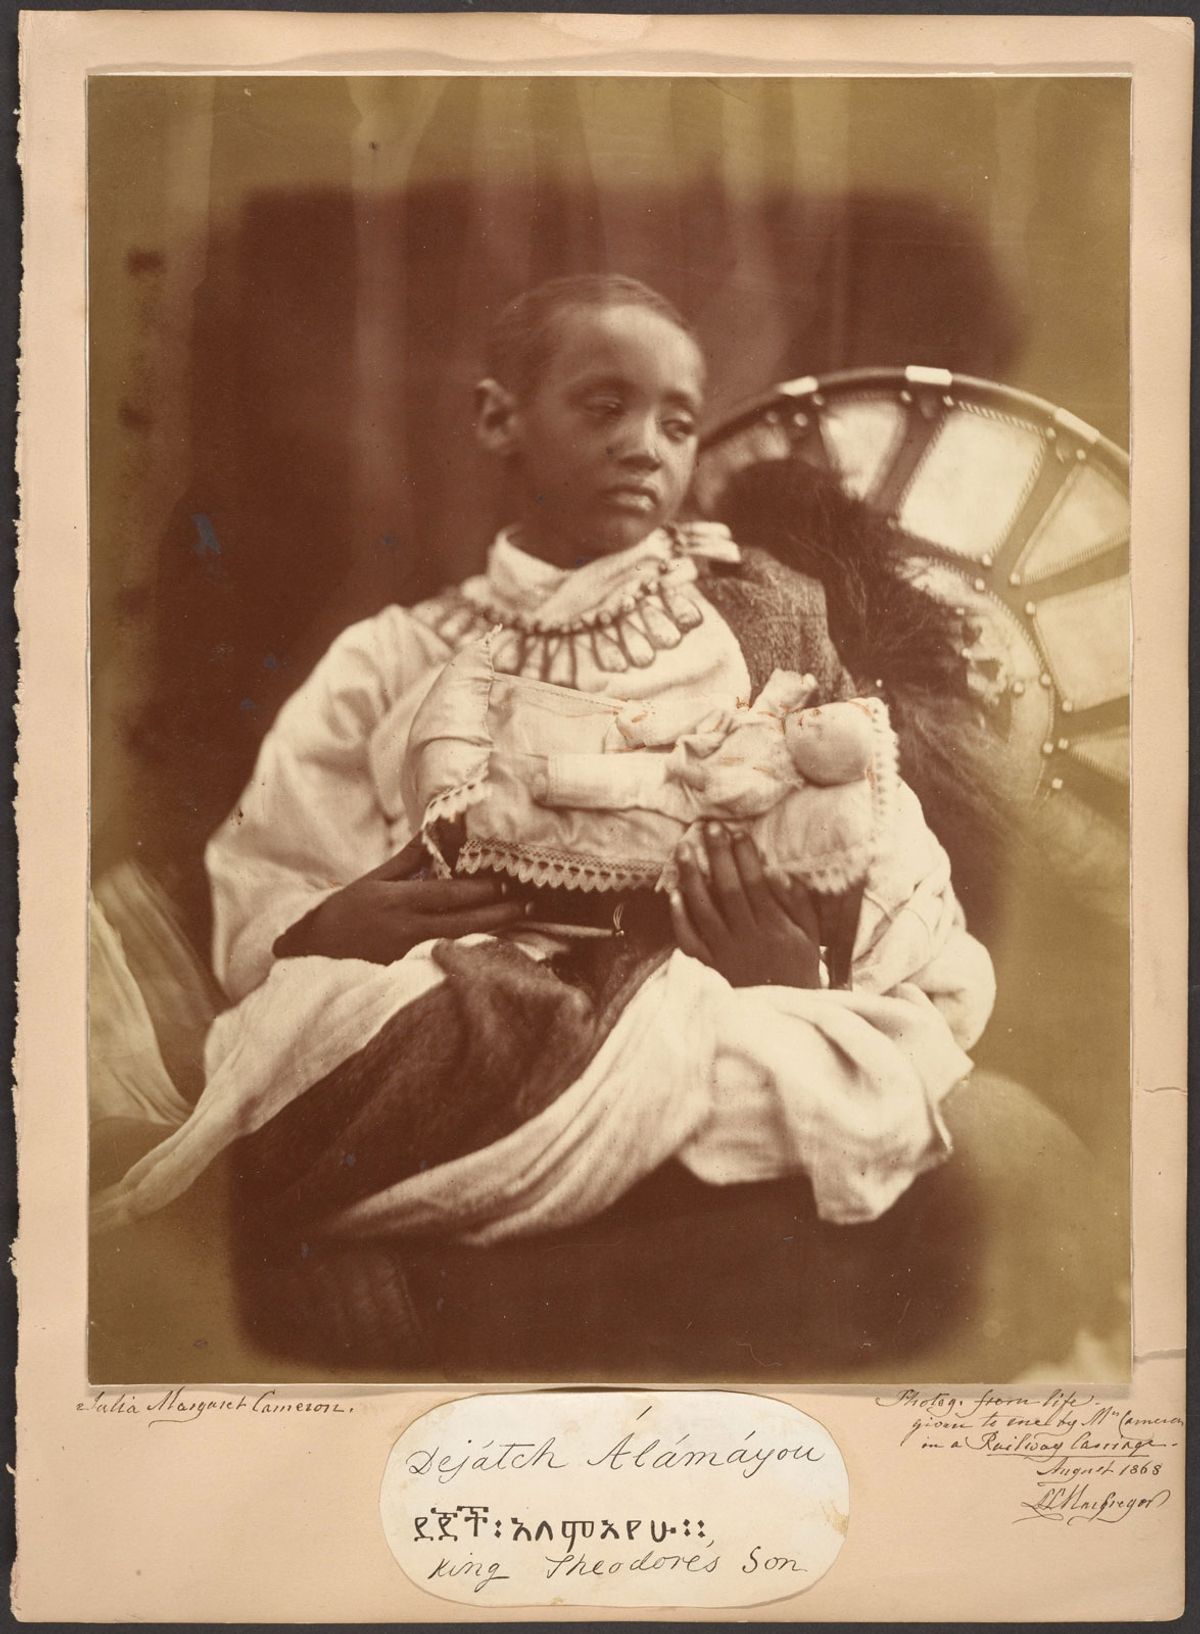 Julia Margaret Cameron's photograph of Déjatch Alámayou, the son of King Theodore who committed suicide after the British defeat of the Ethiopians at the battle of Magdala. He was taken to England where Queen Victoria saw to his education and protection. He was buried at Windsor Castle when he died of pleurisy aged 18. Wikimedia commons